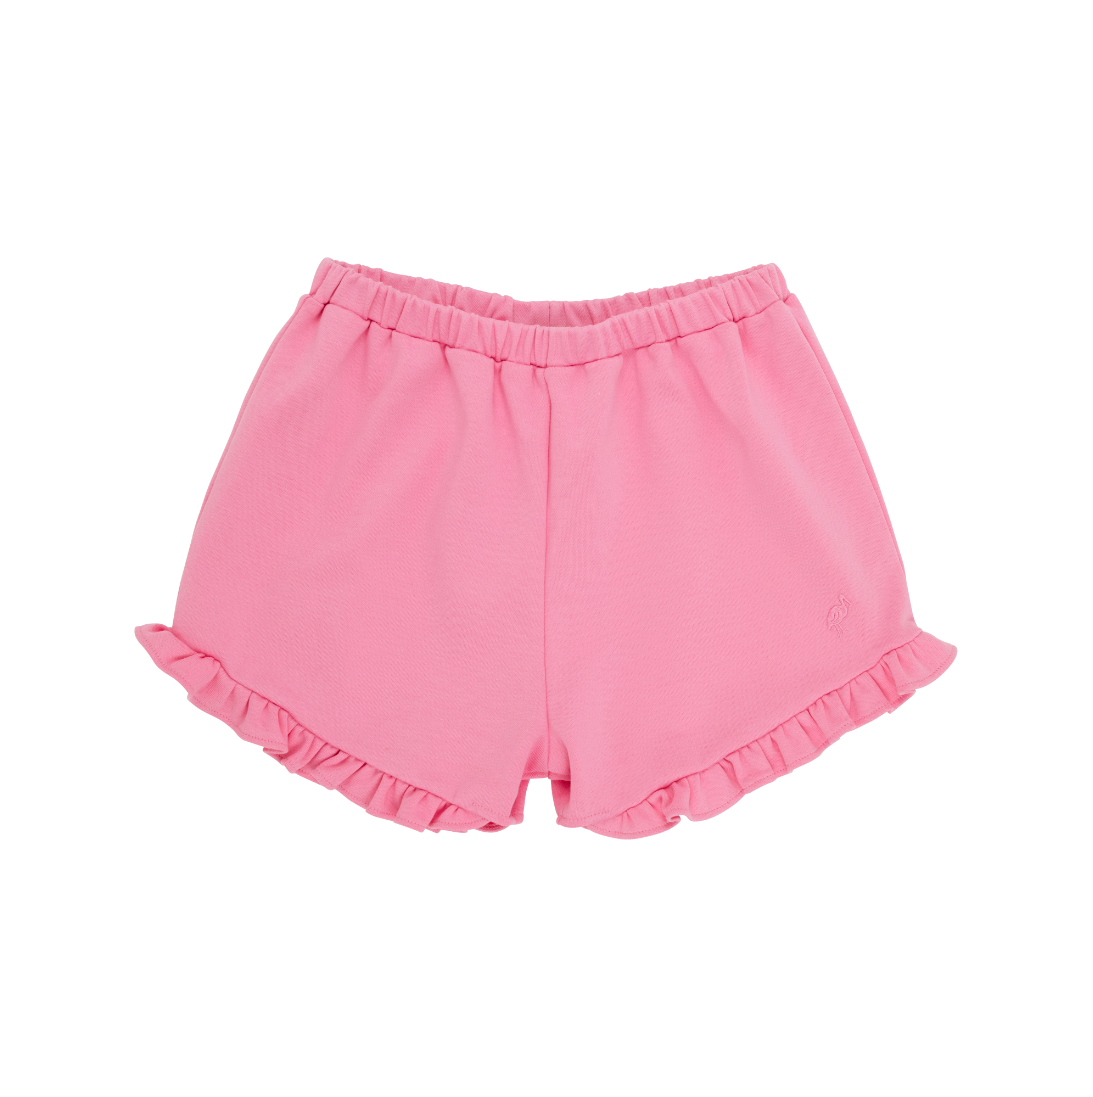 TBBC: Shelby Anne Shorts - Hamptons Hot Pink